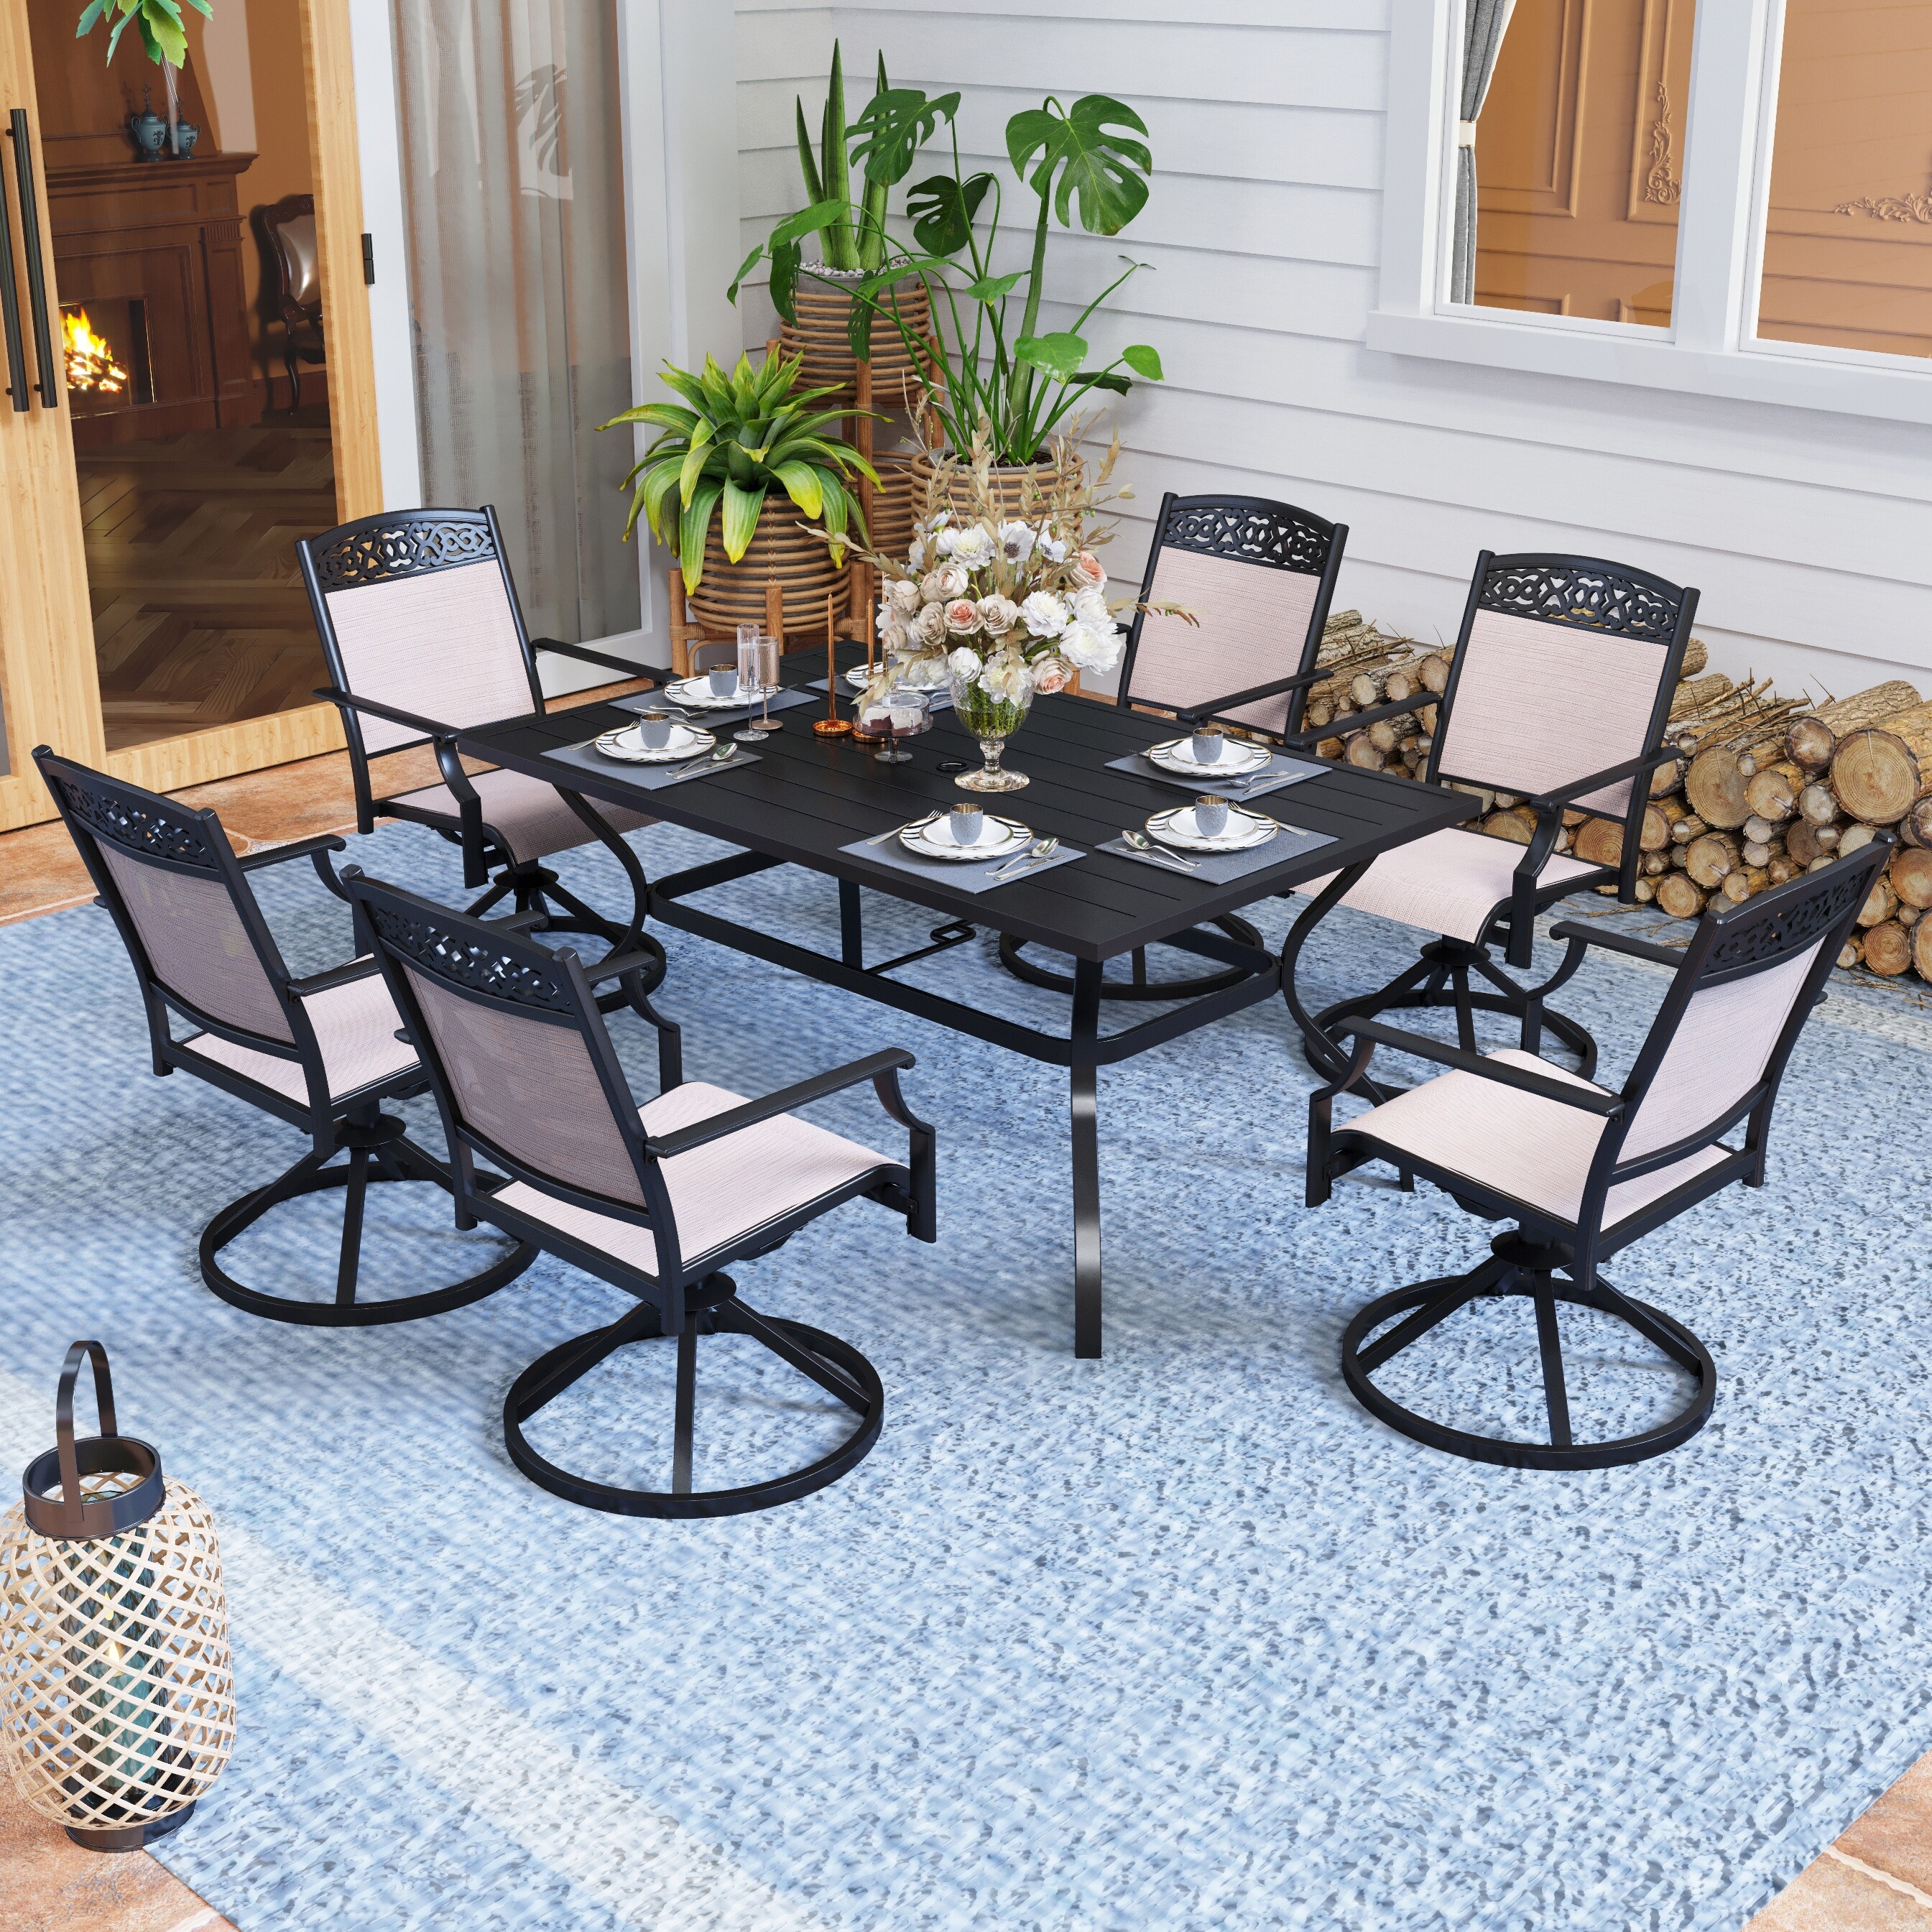 Phi Villa 5/7-Piece Cast Aluminum Patio Dining Set wtih Stackle or Swivel Chairs and 1 Metal Table 4StackableChair - image 2 of 5